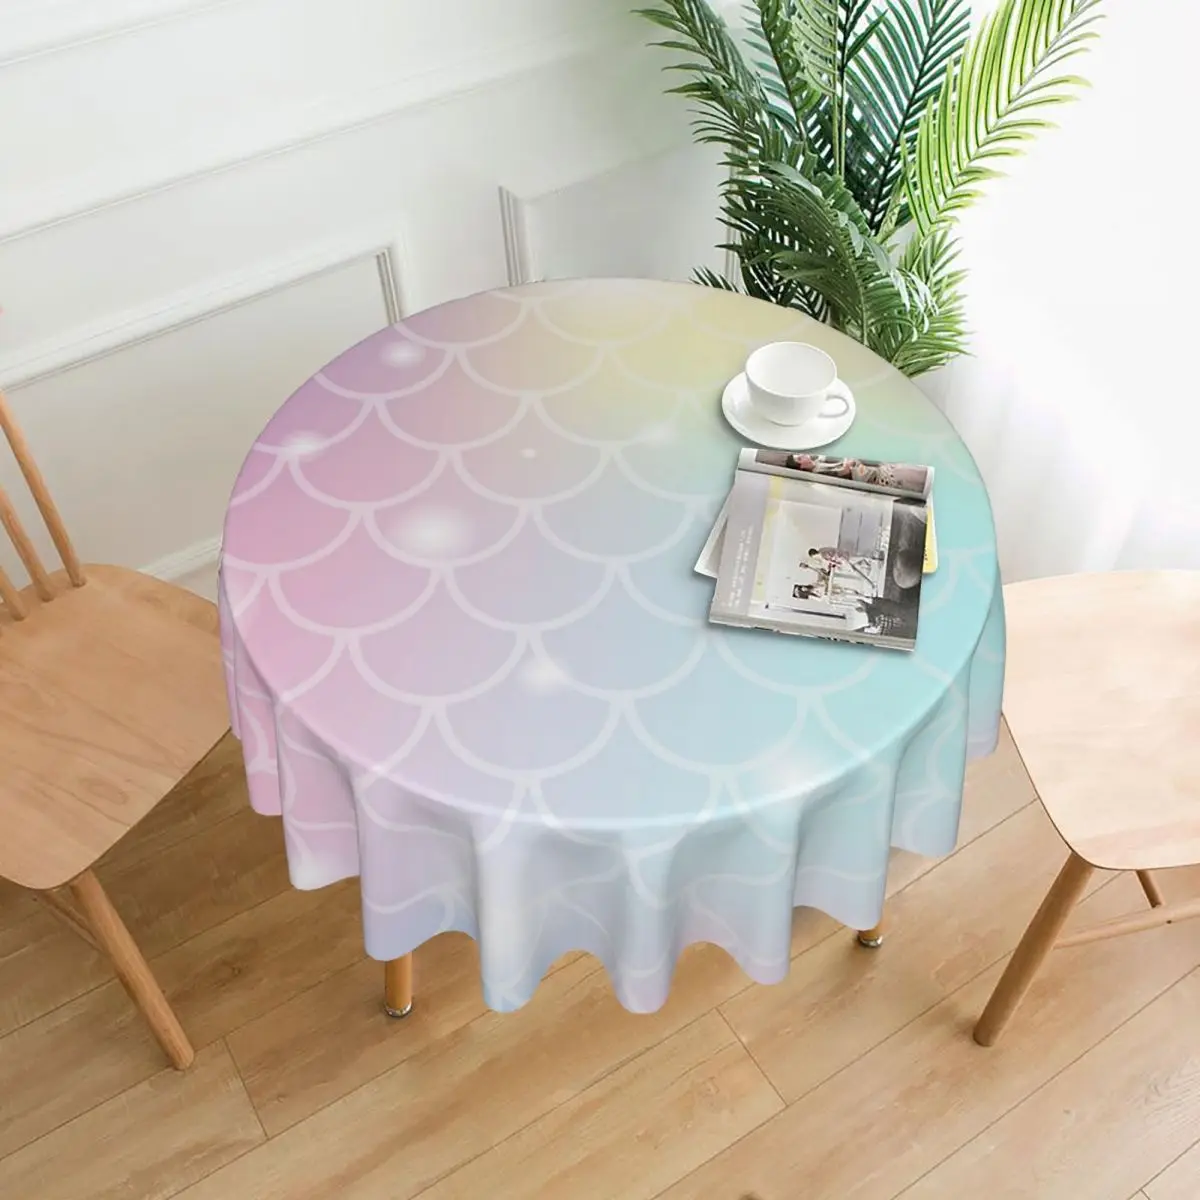 

Mermaid Scale Shining Sparcles On Pastel Unicorn Magic Color Tablecloths Living Room Table Decoration Fabric Round Tablecloth